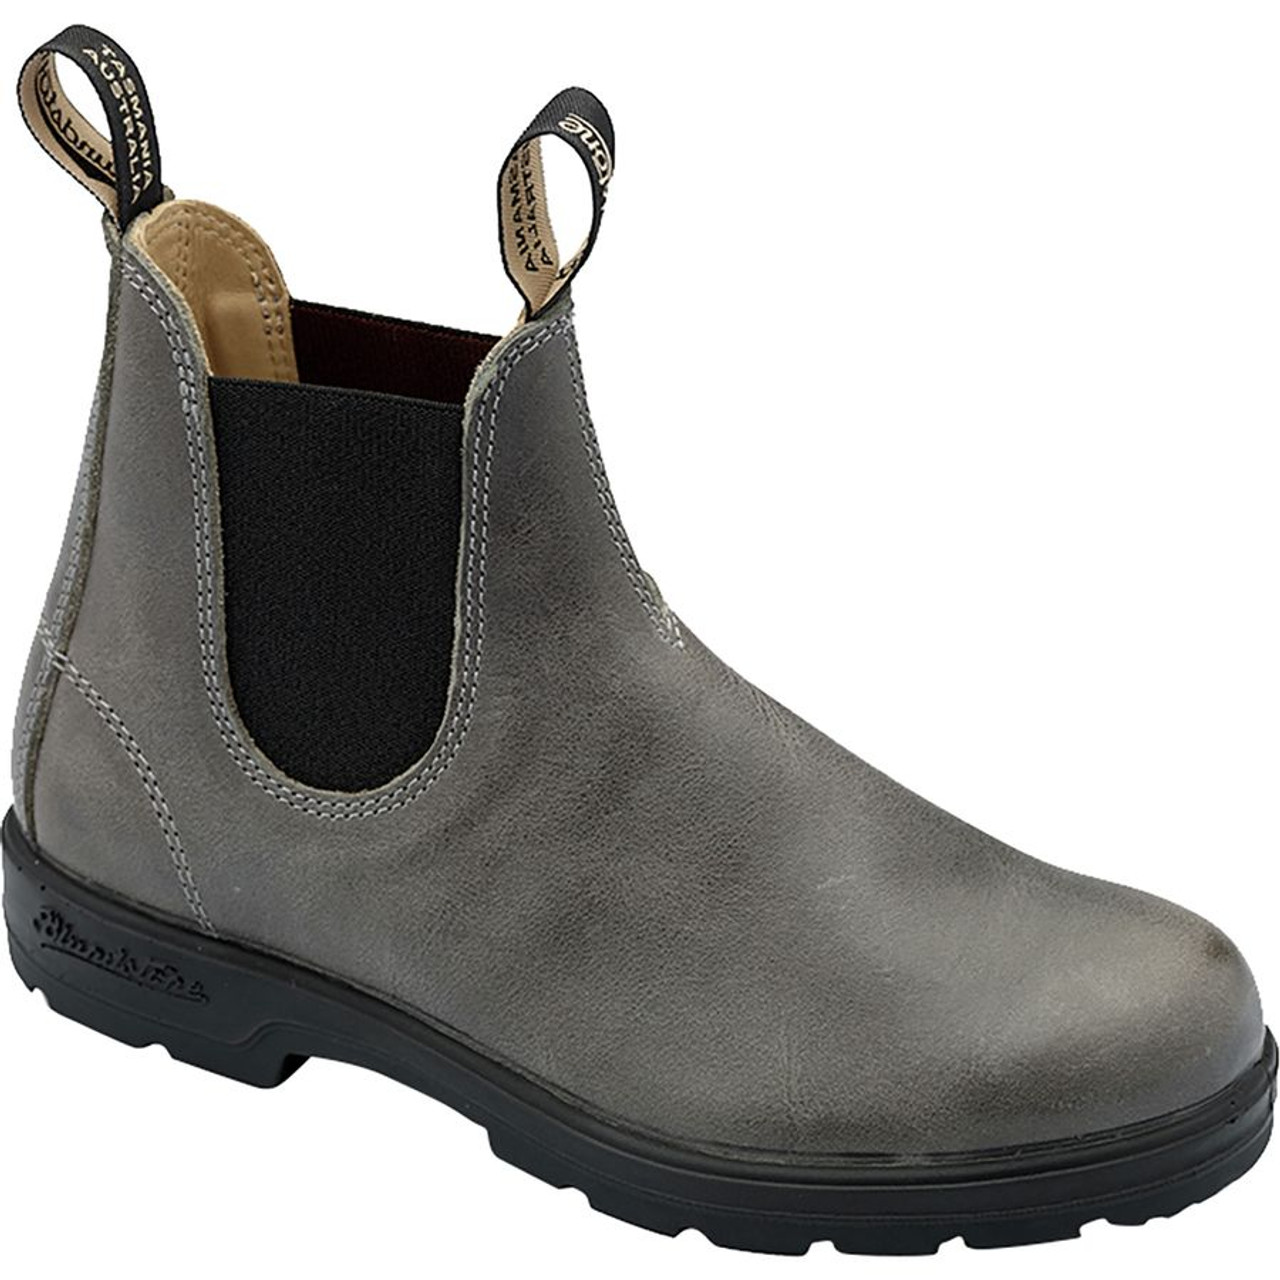 Where Are Blundstones Shipped From?